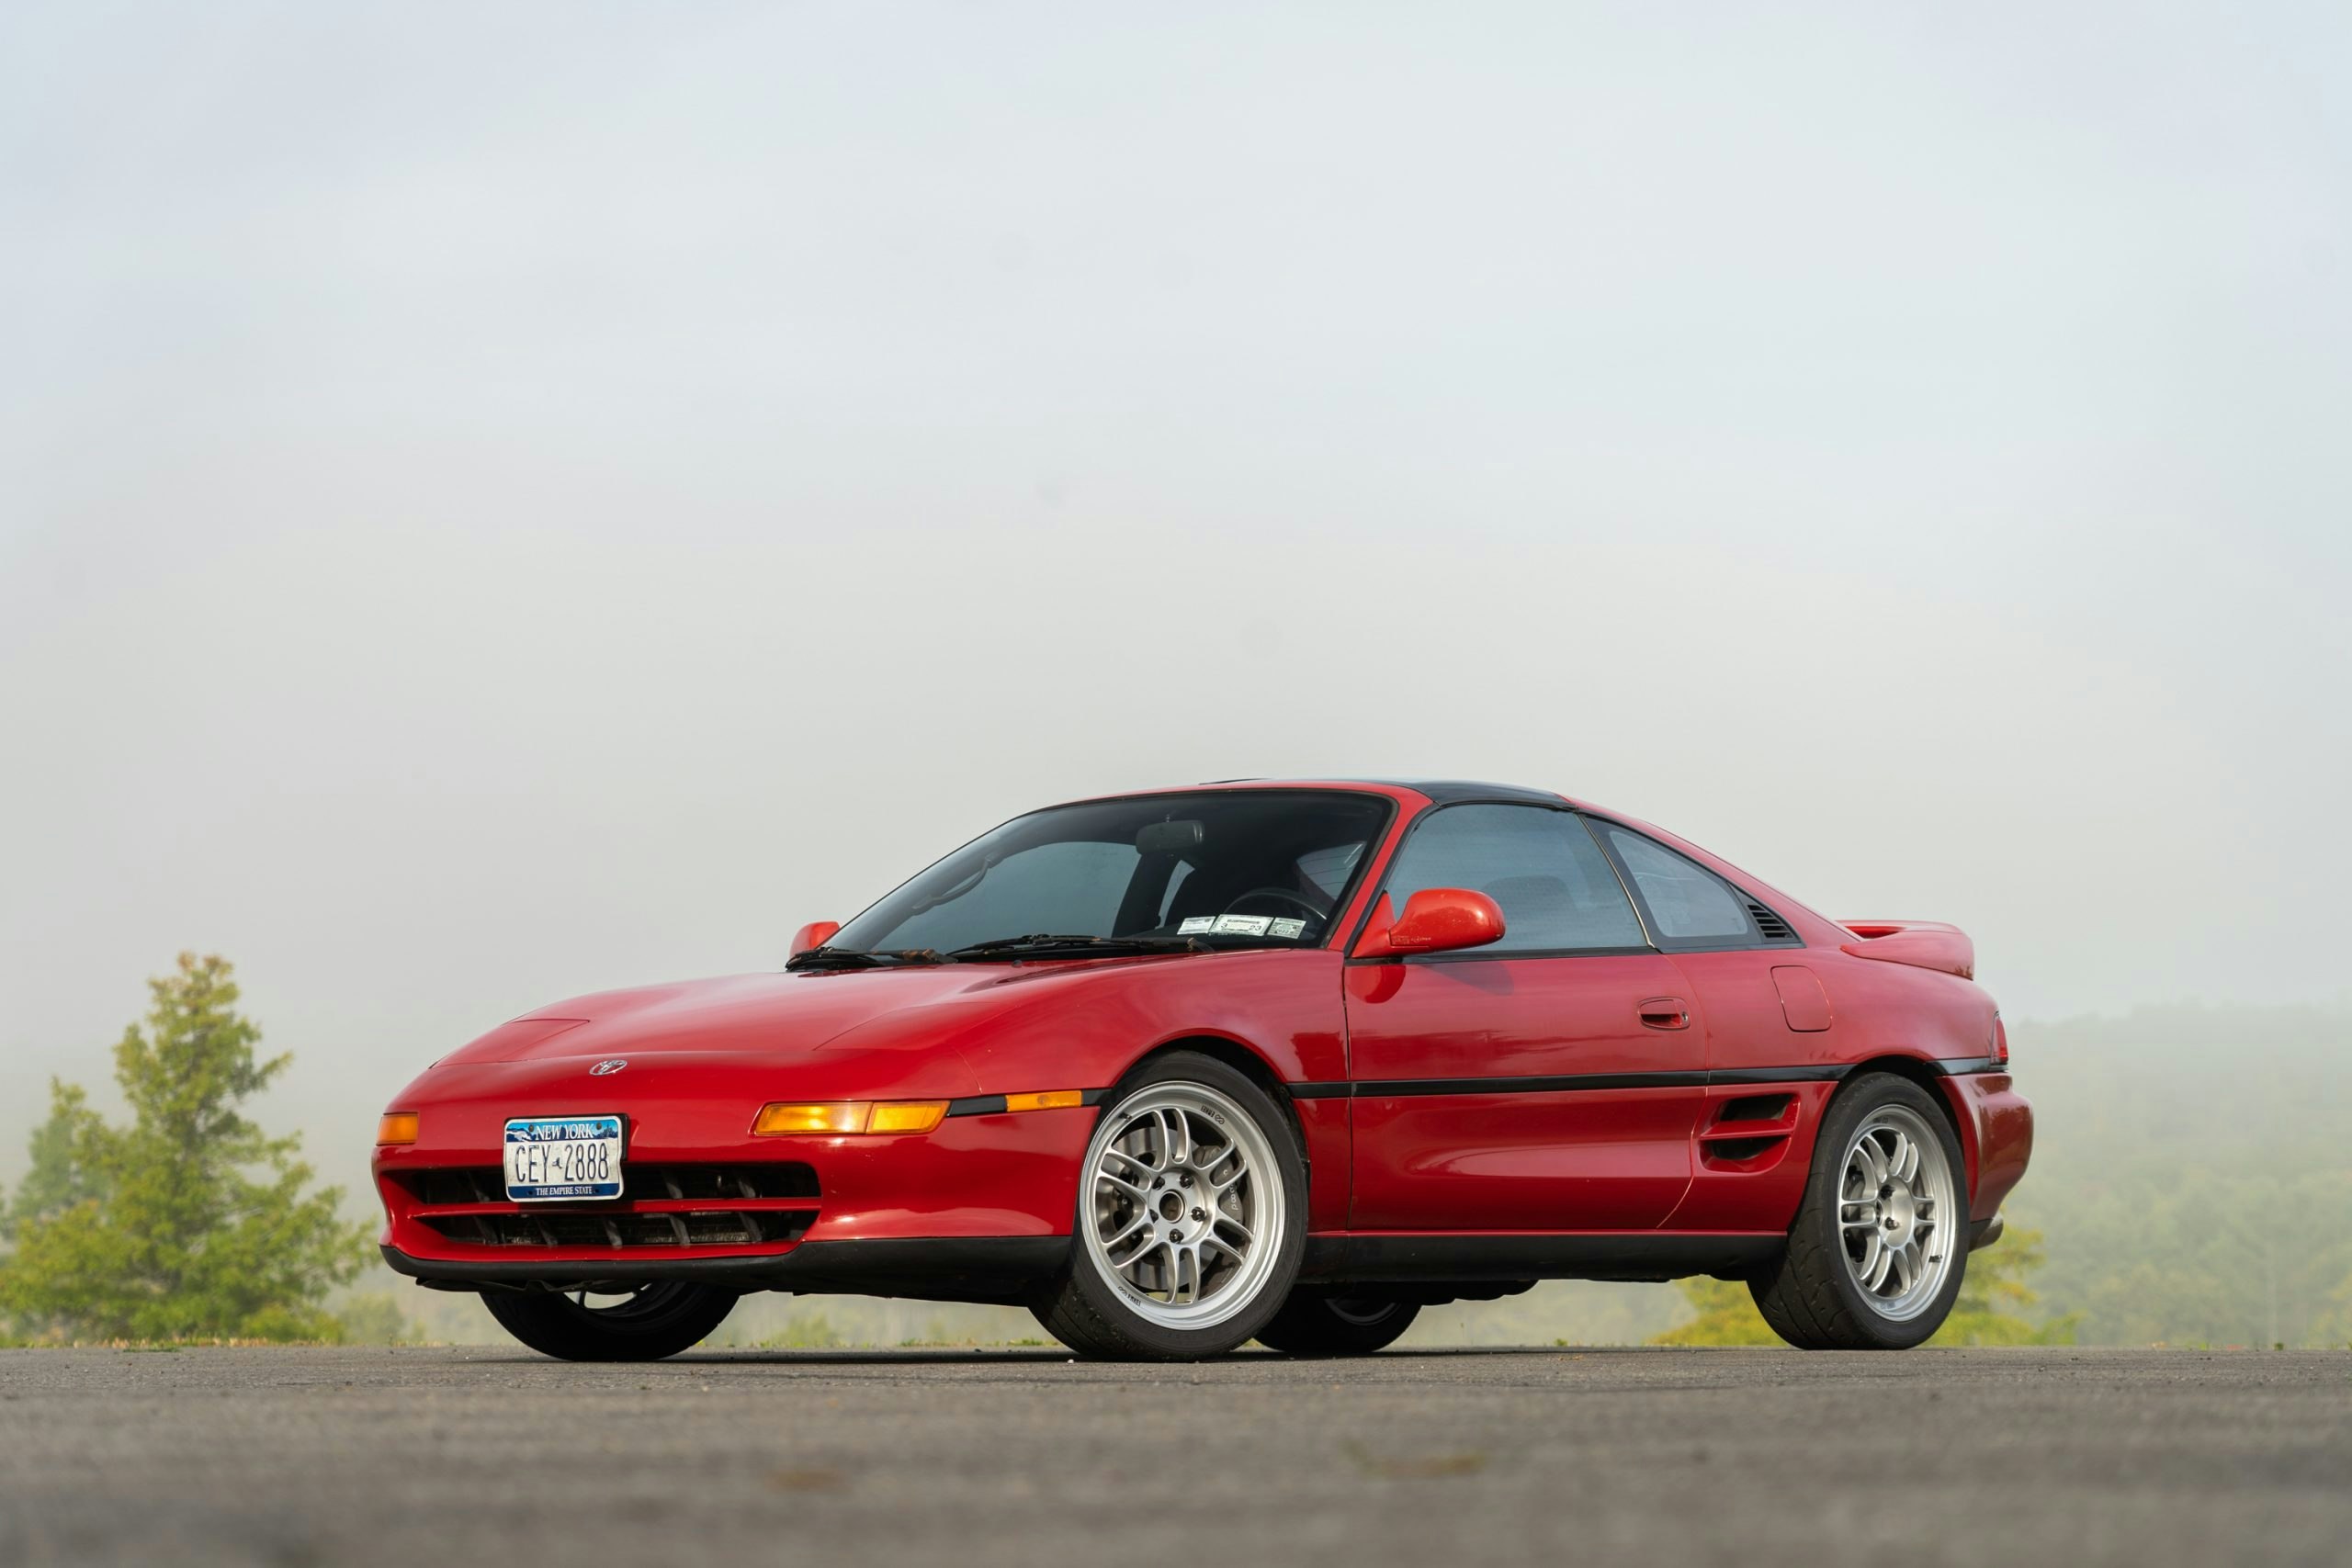 There is a YouTube video reviewing the 1995 Toyota MR2 GT Turbo SW20 imported from Japan and purchased at a US auction.